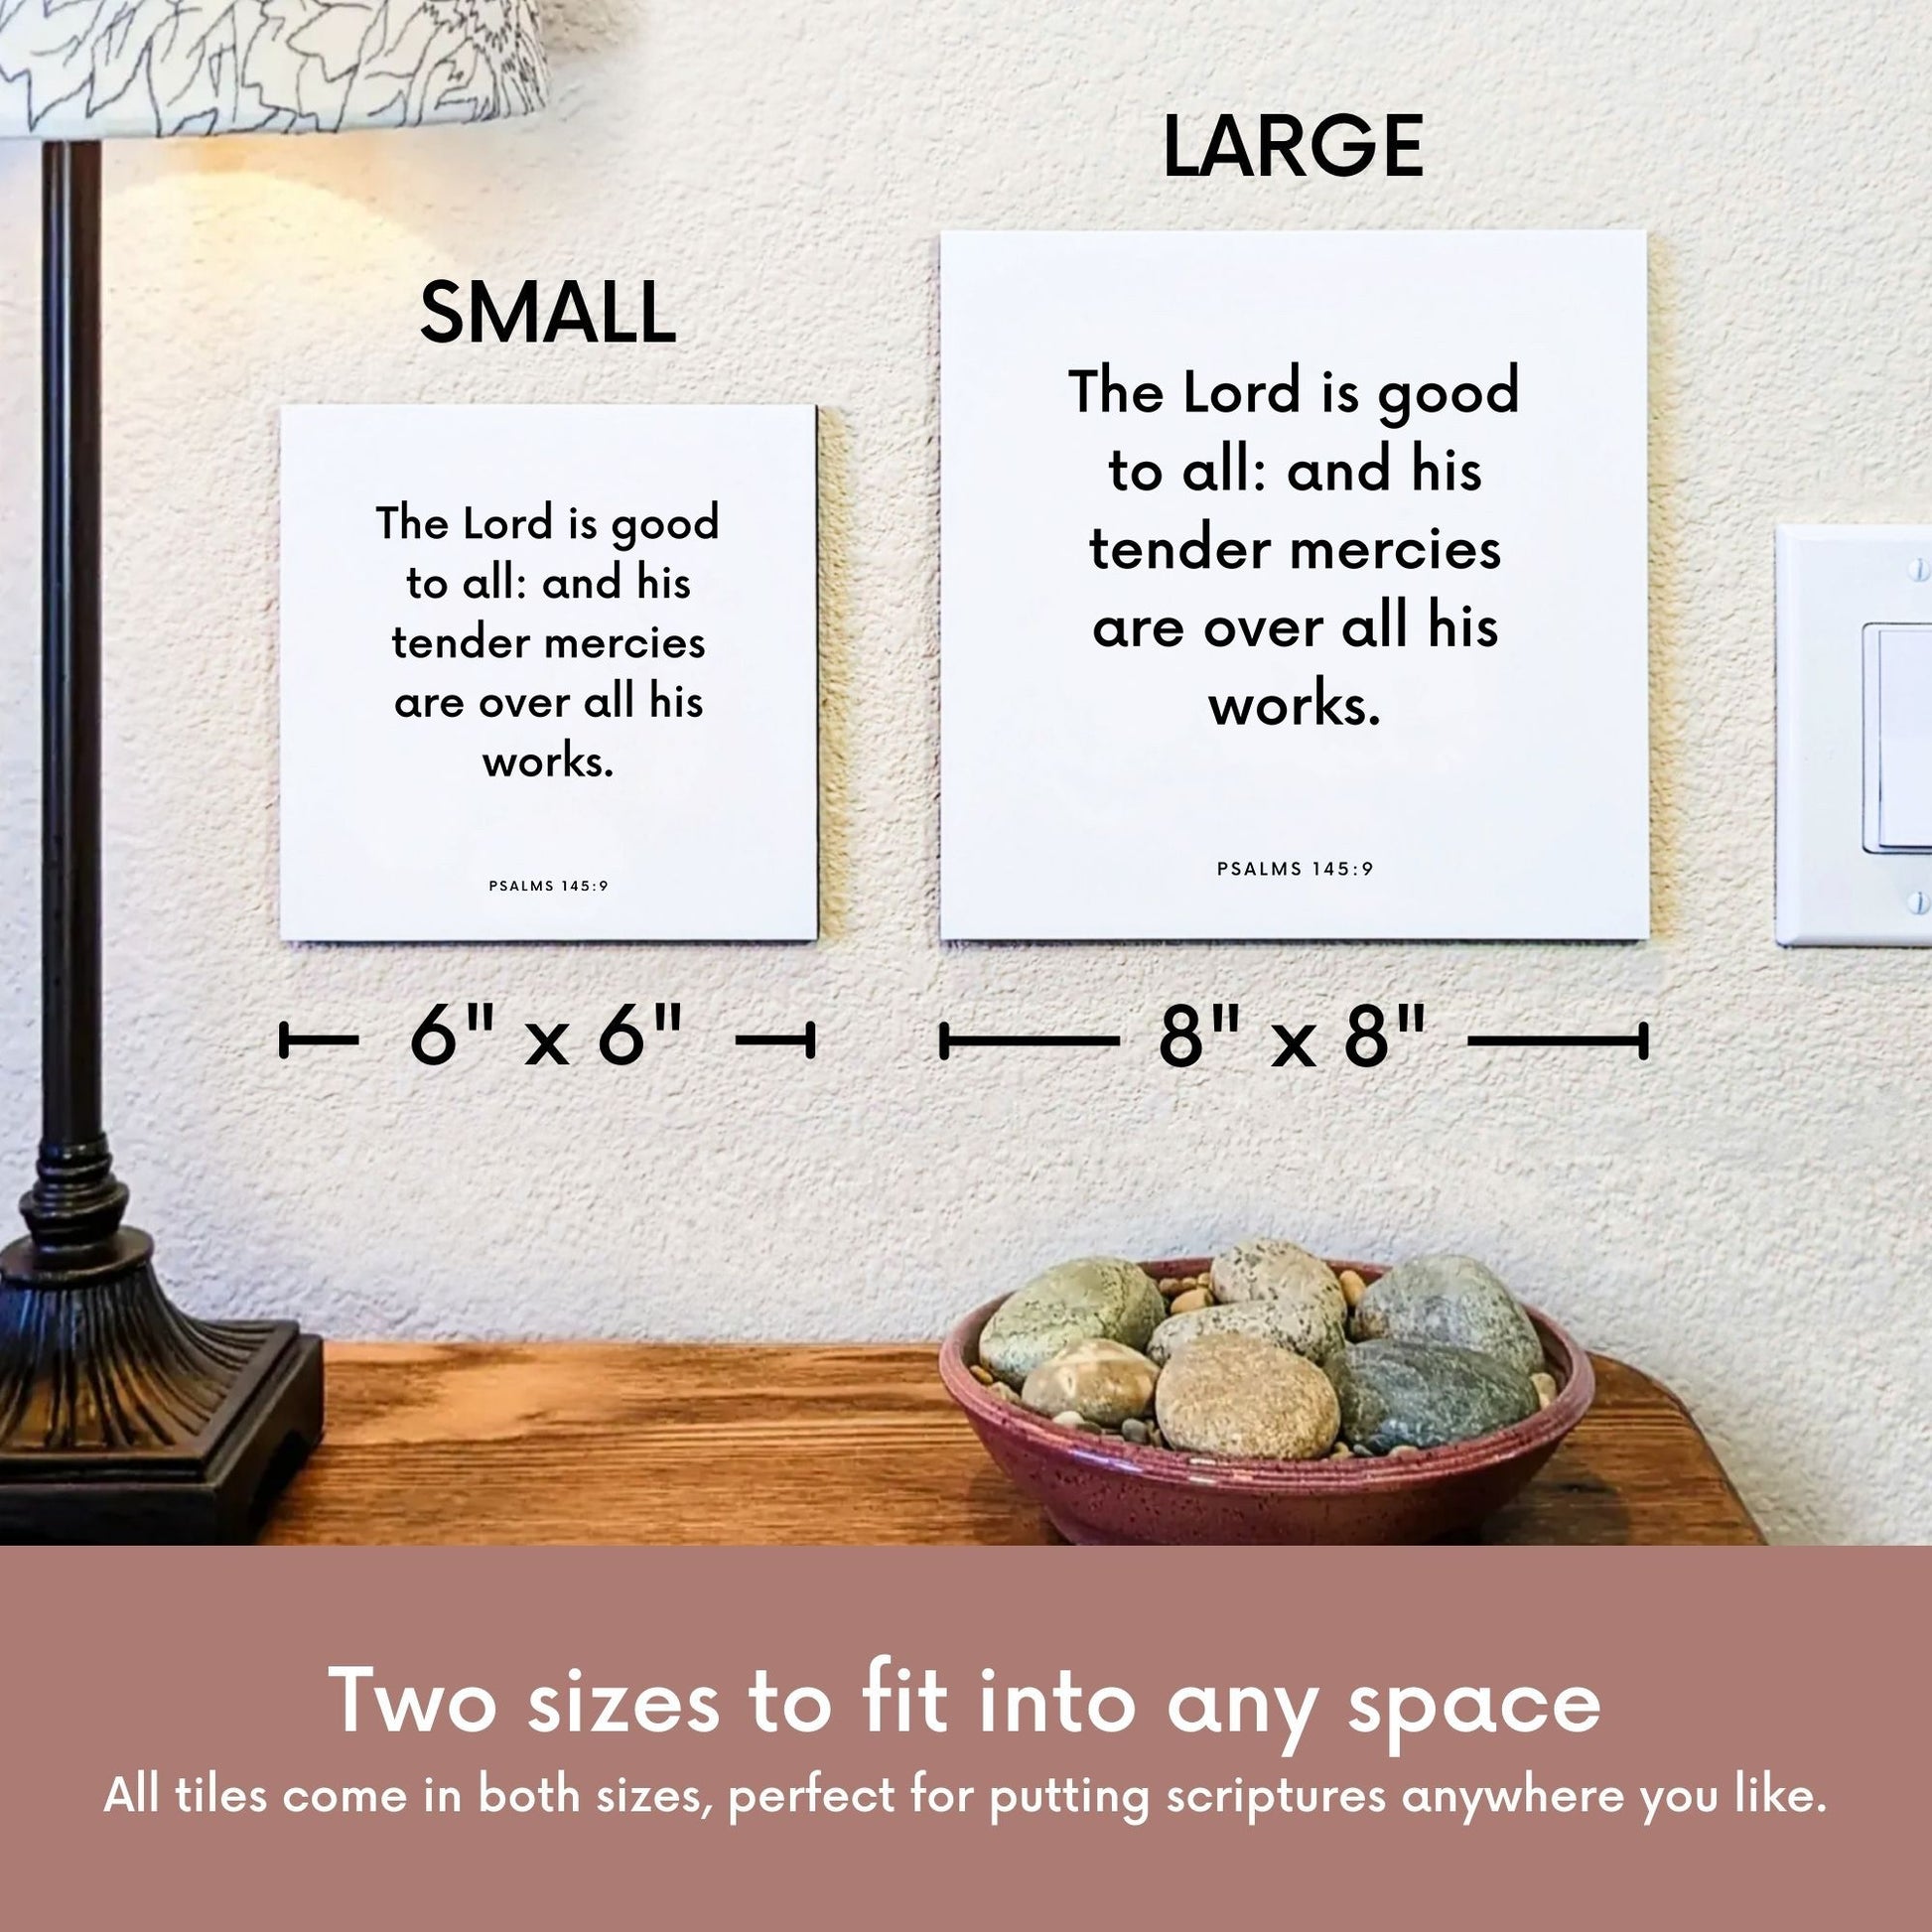 Scripture tile size comparison for Psalms 145:9 - "His tender mercies are over all his works"